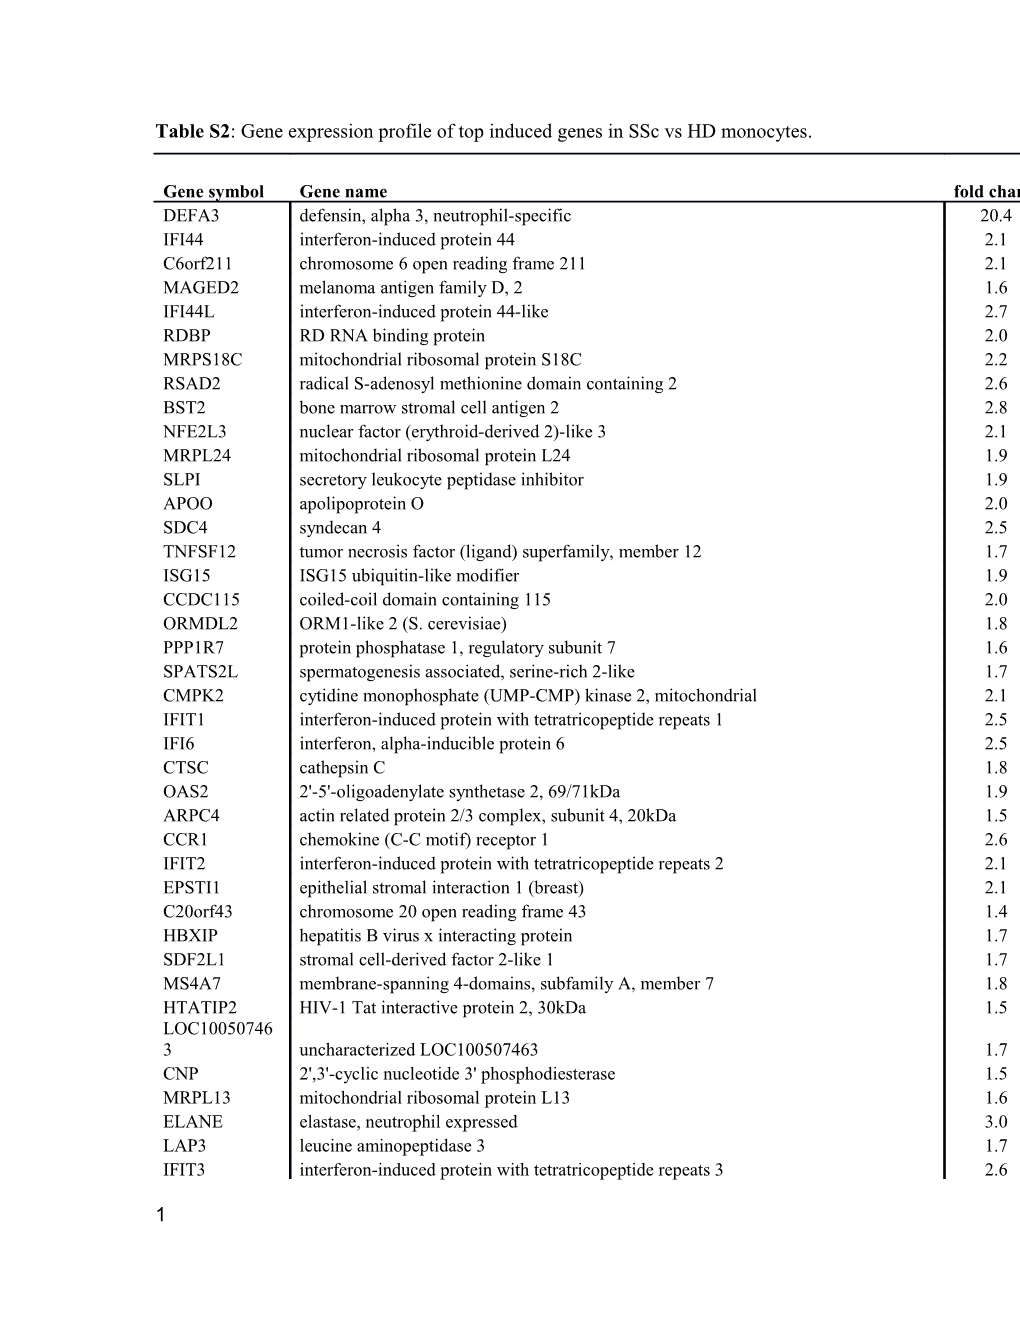 Table S2:Gene Expression Profile of Top Induced Genes in Sscvs HD Monocytes